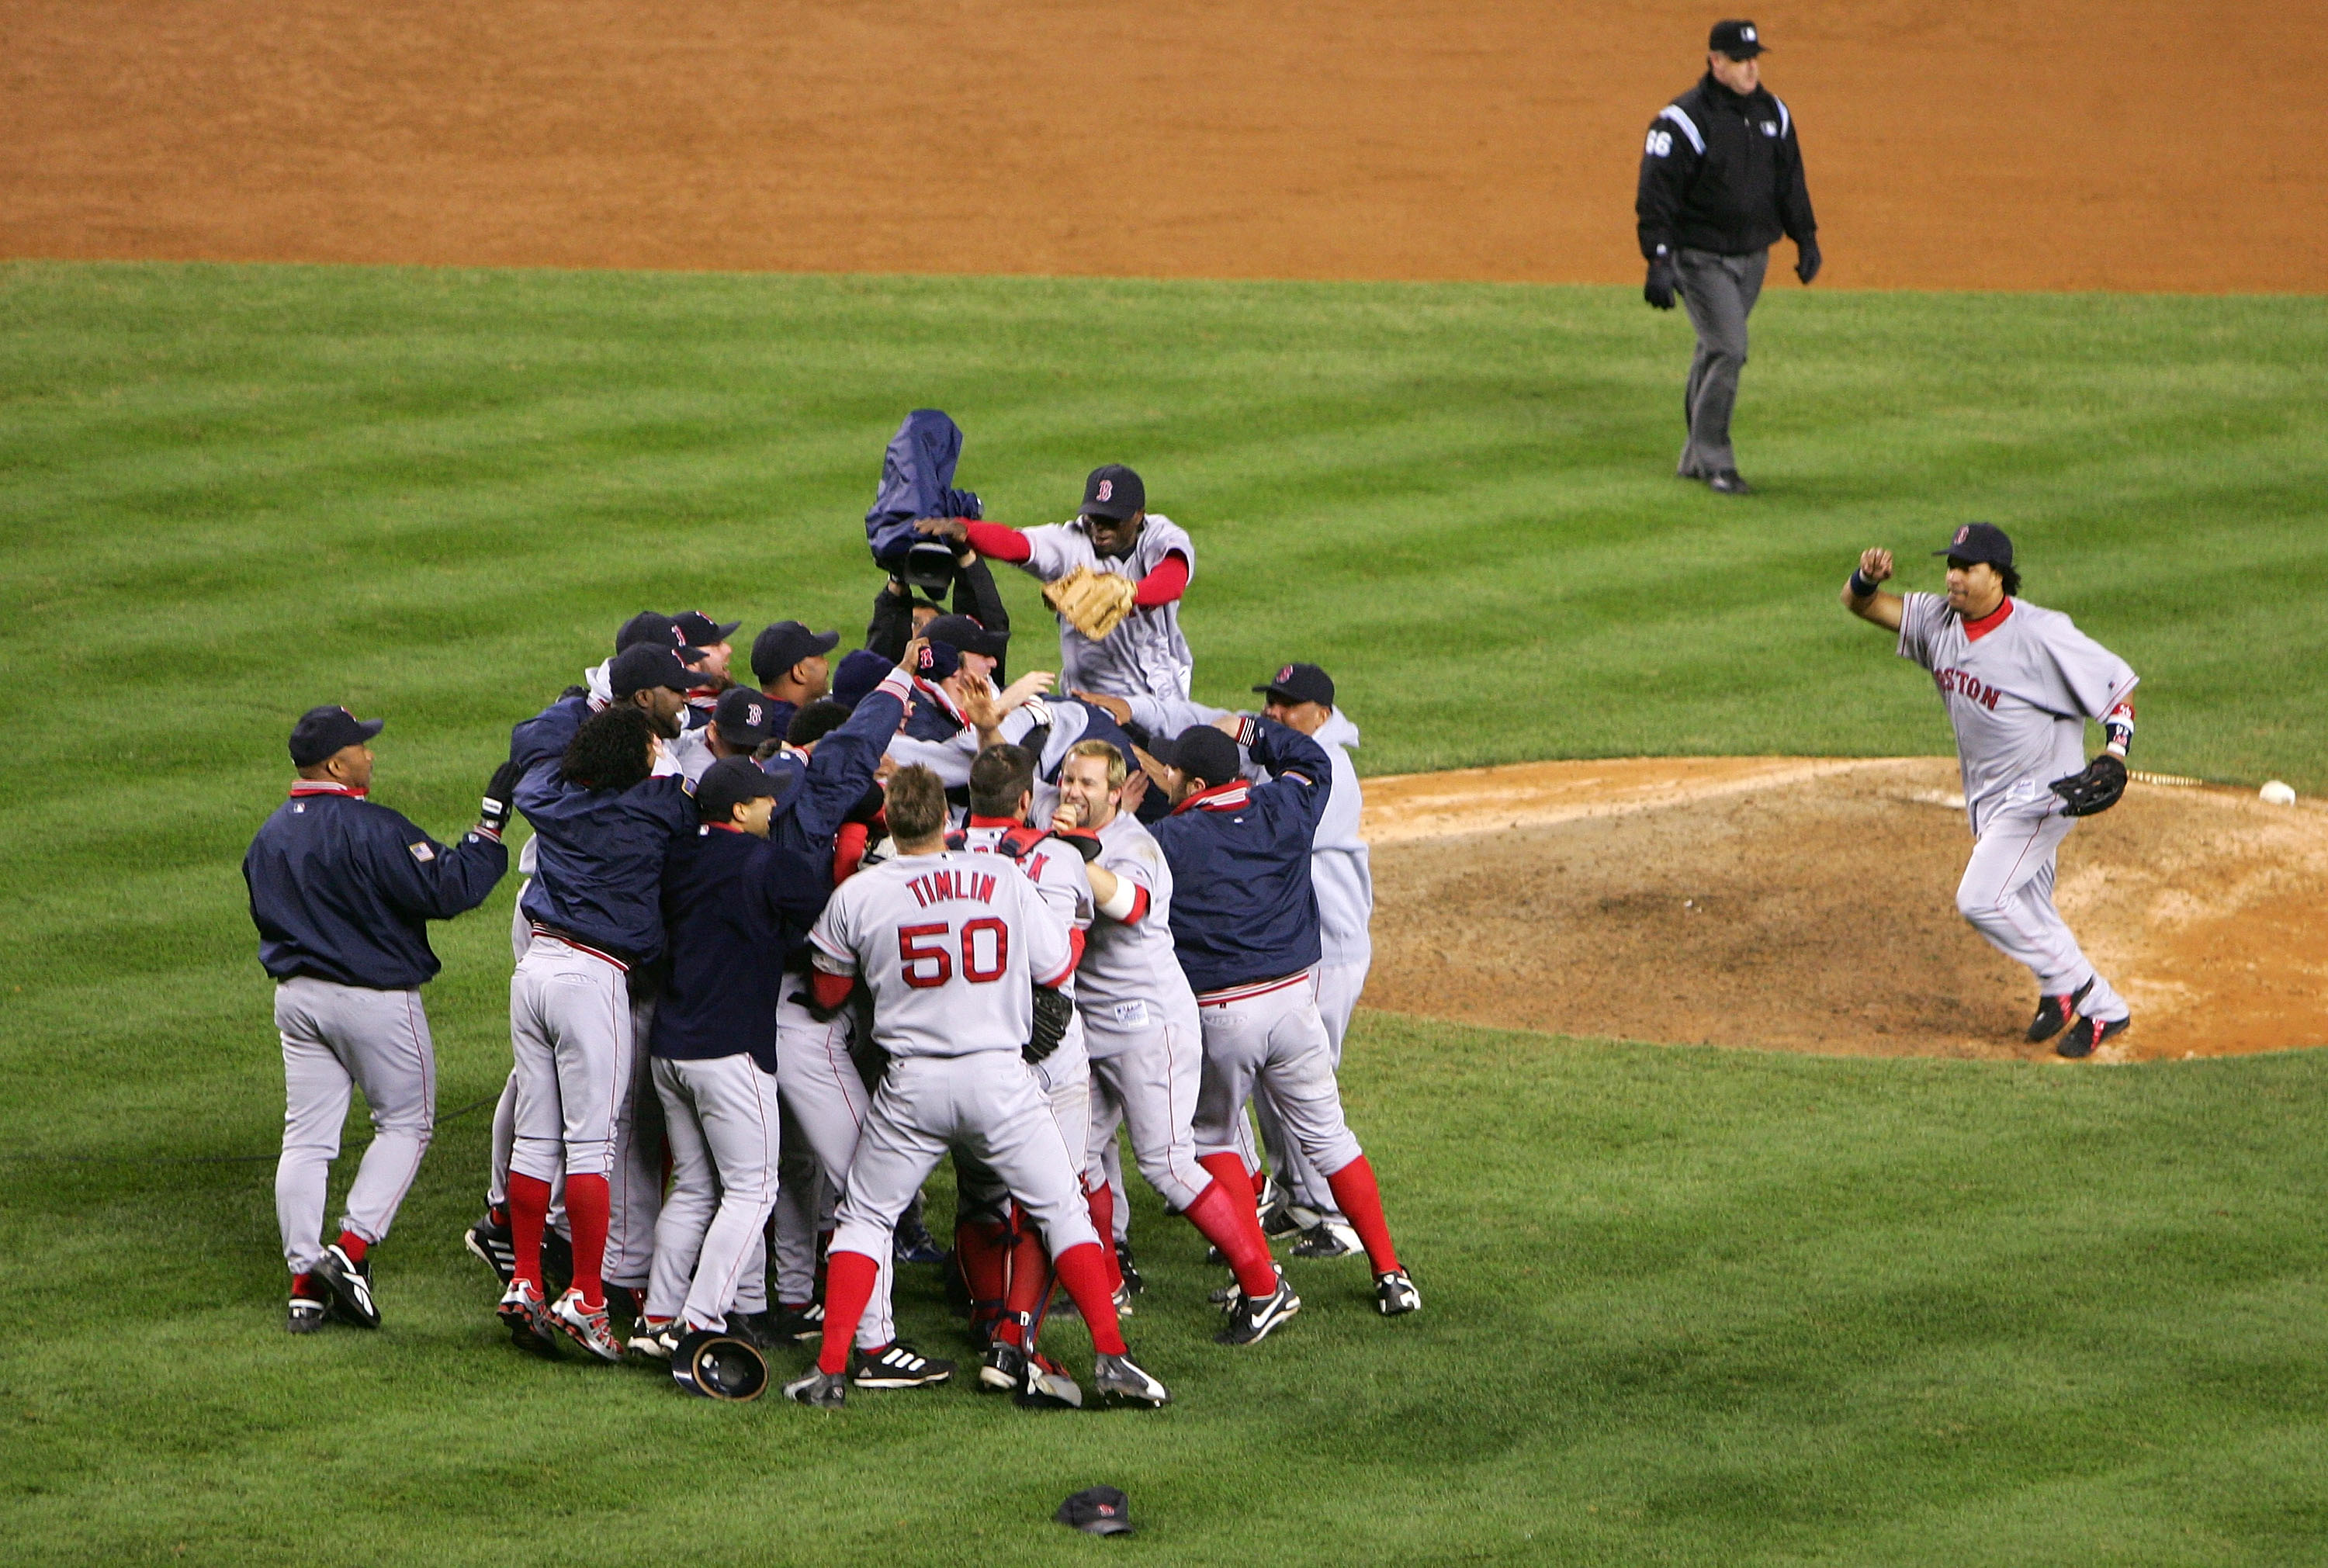  The Boston Red Sox celebrate after defeating the New York Yankees 10-3 to win game seven of the American League Championship Series on October 20, 2004 at Yankee Stadium in the Bronx borough of New York City. (credit: Ezra Shaw/Getty Images)